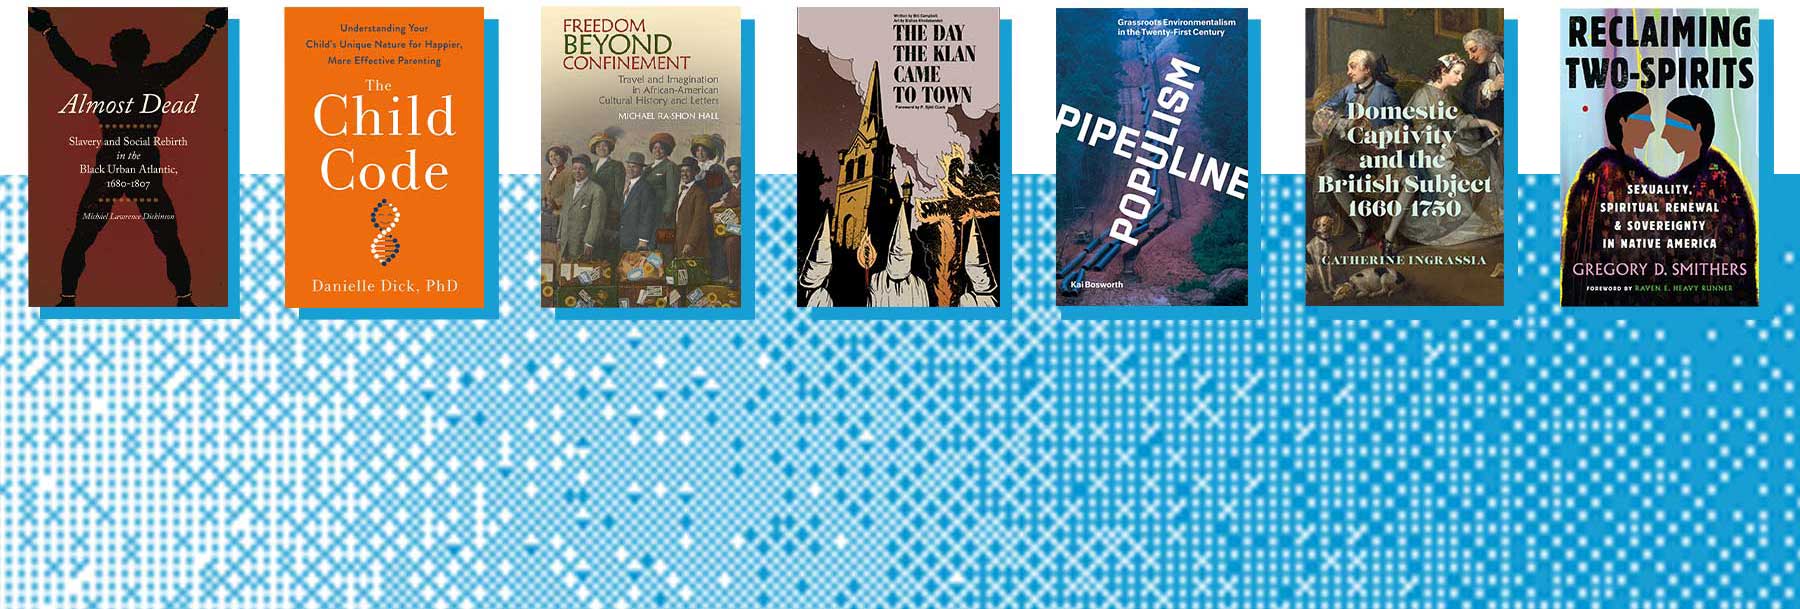 book covers for books published this year by faculty in the v.c.u. college of humanities and sciences